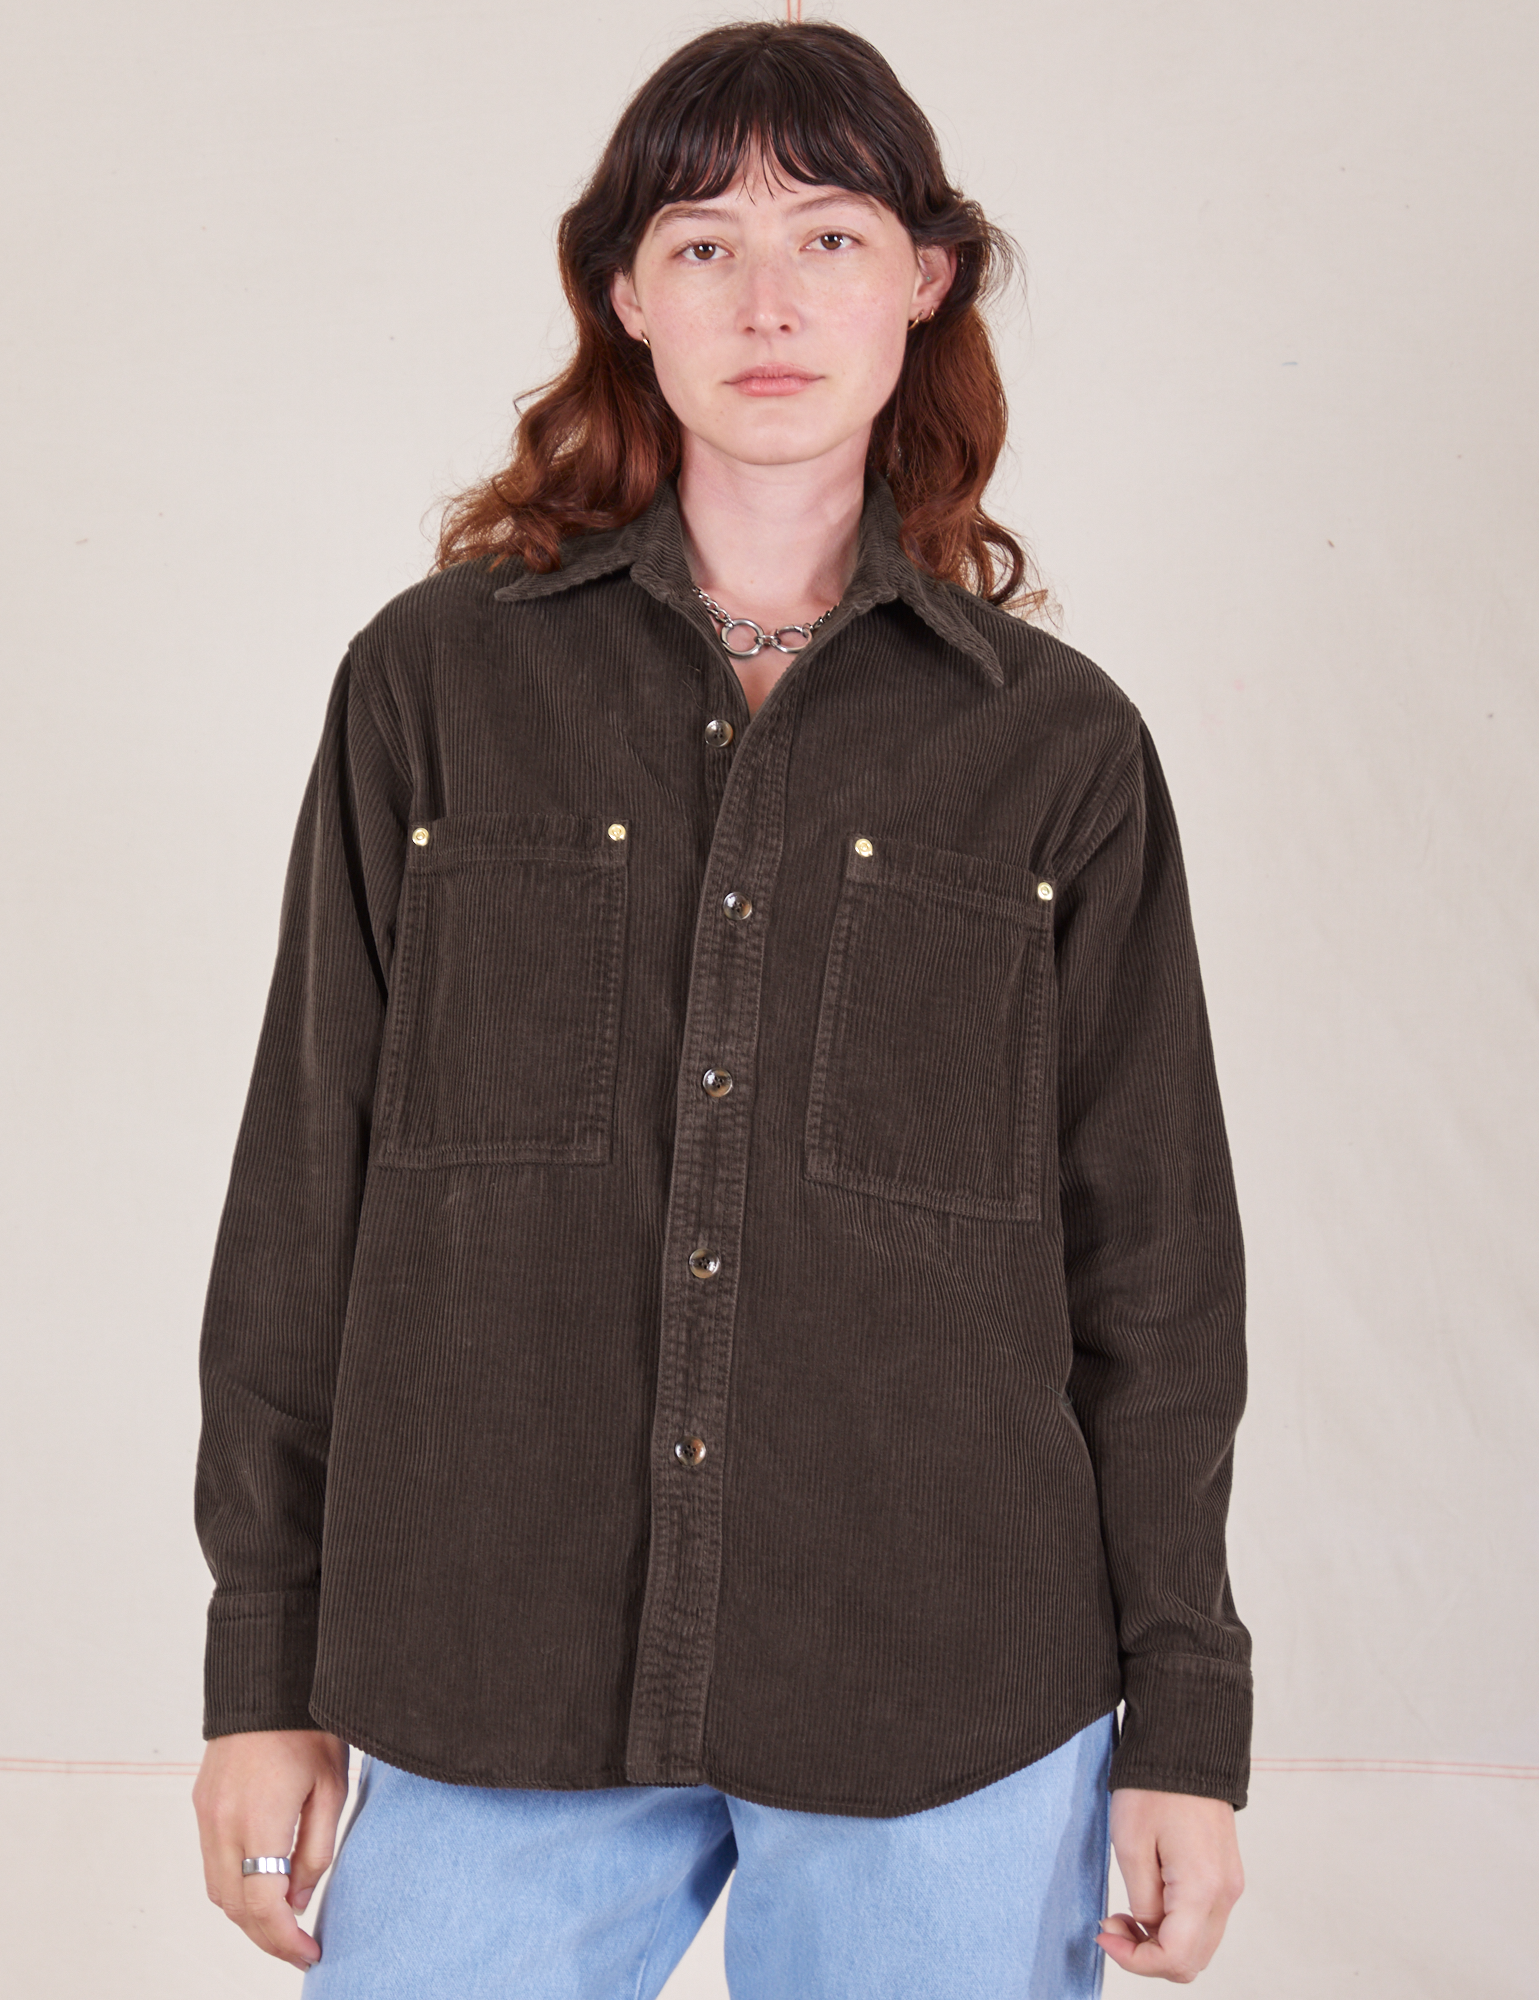 Alex is wearing a buttoned up Corduroy Overshirt in Espresso Brown